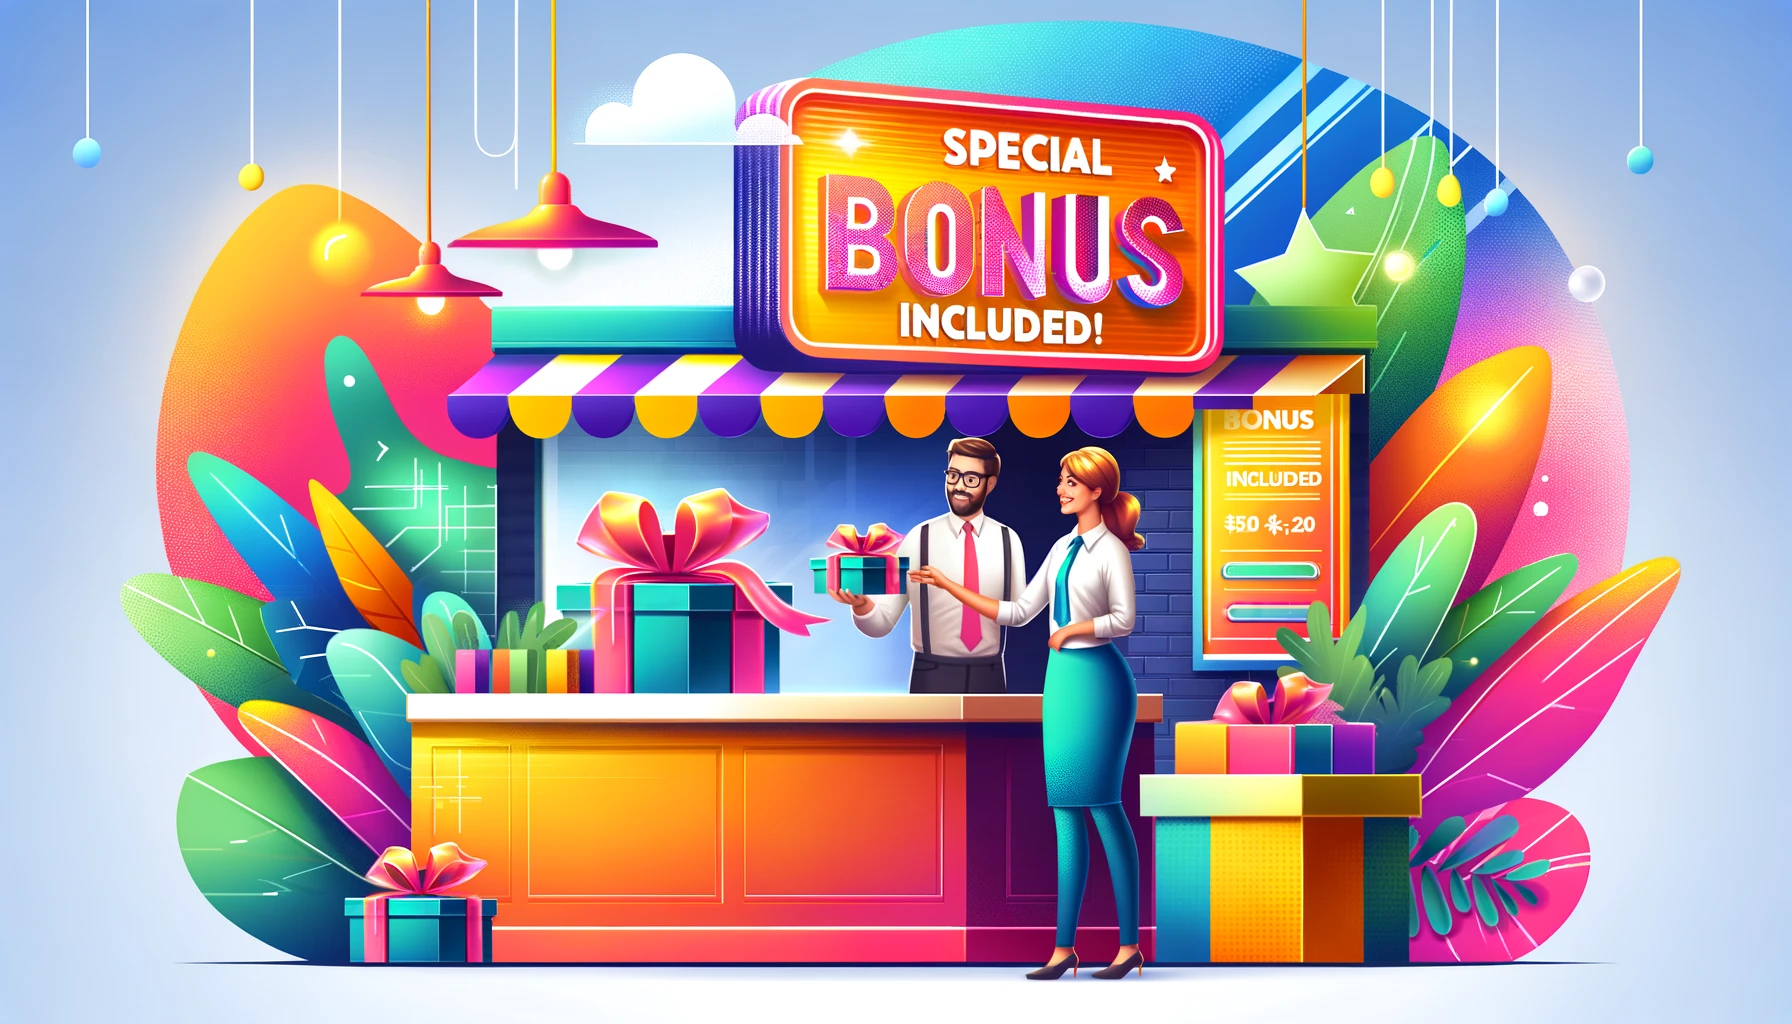 Stylized illustration of a vibrant business setting where a salesperson hands a bonus gift box to a customer, under a 'Special Bonus Included!' banner, depicting the effective use of bonuses and incentives for conversion tactics.